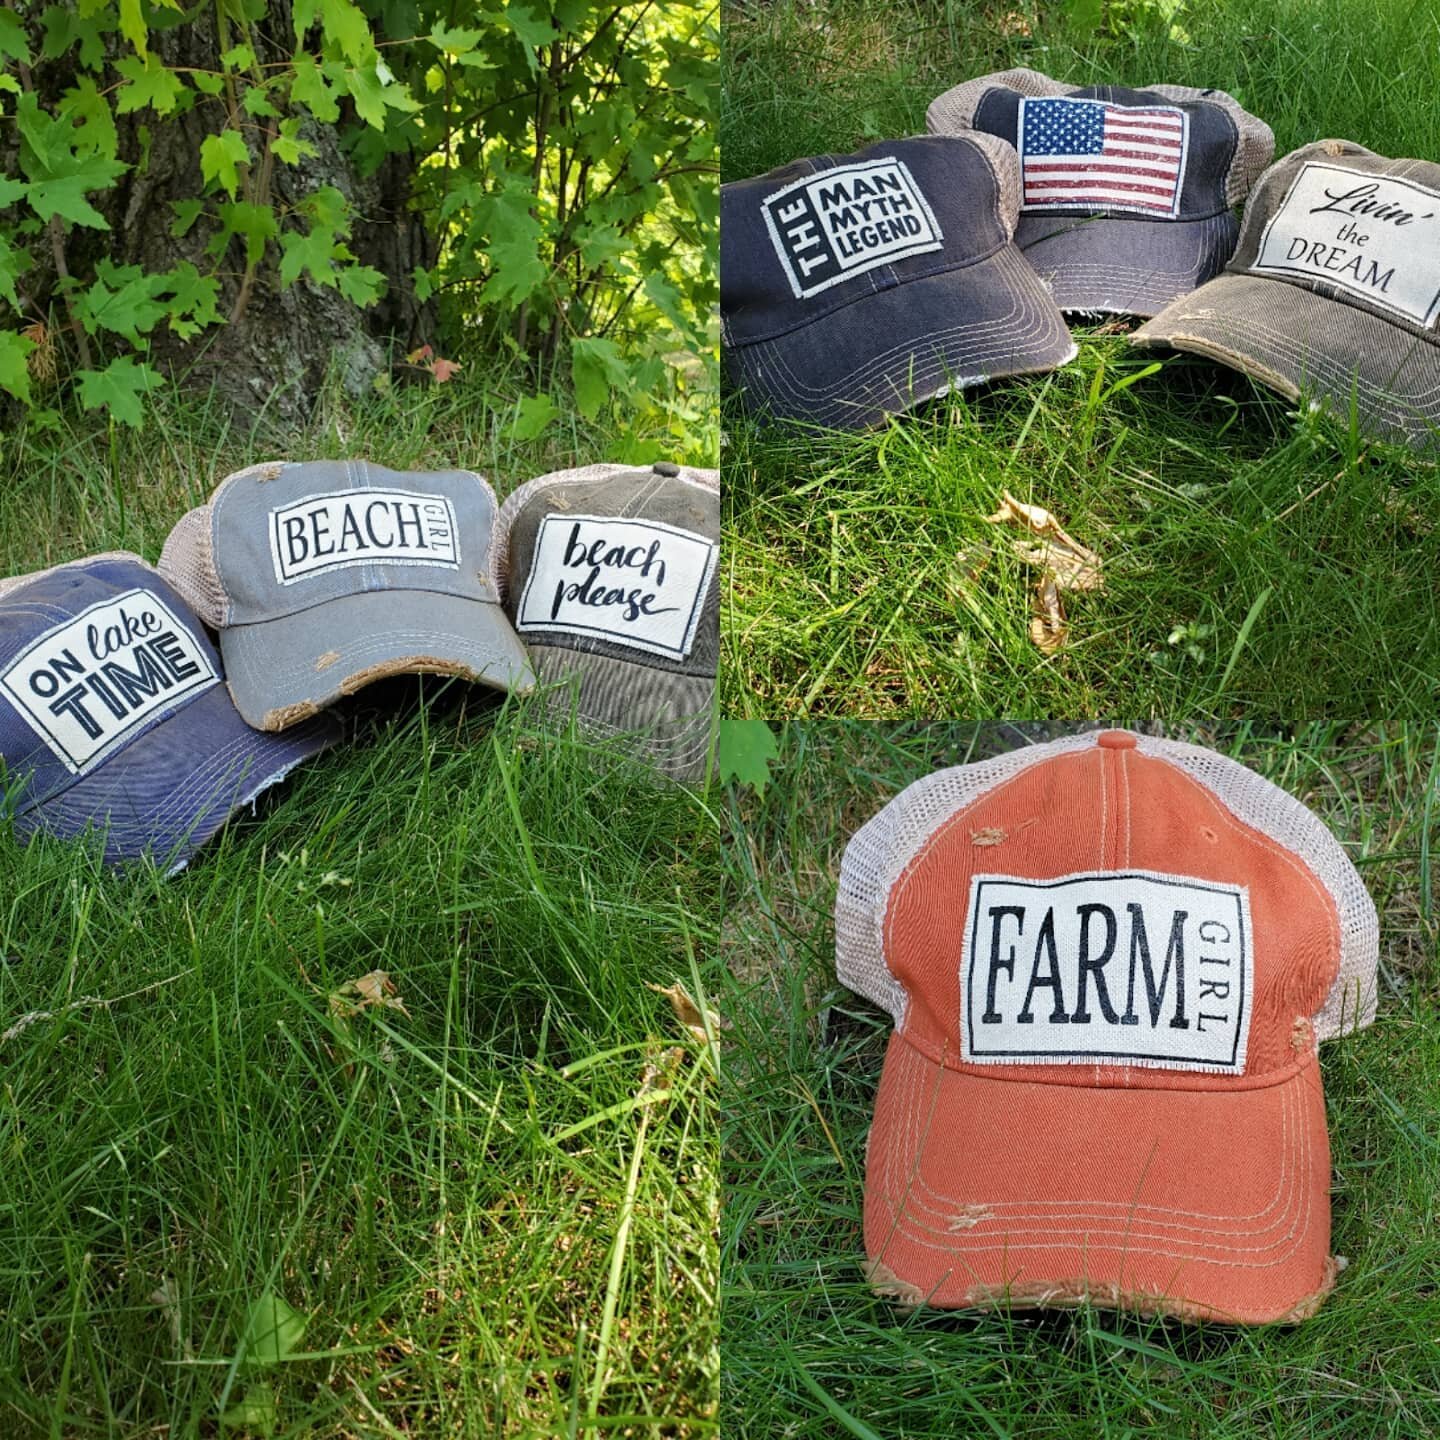 New at On The Farm, Trucker Hats with a variety of sayings. #truckerhats, #beachlife, #local, #americanflag, #happycamper, #i'llbringthebaddecisions, #farmgirl